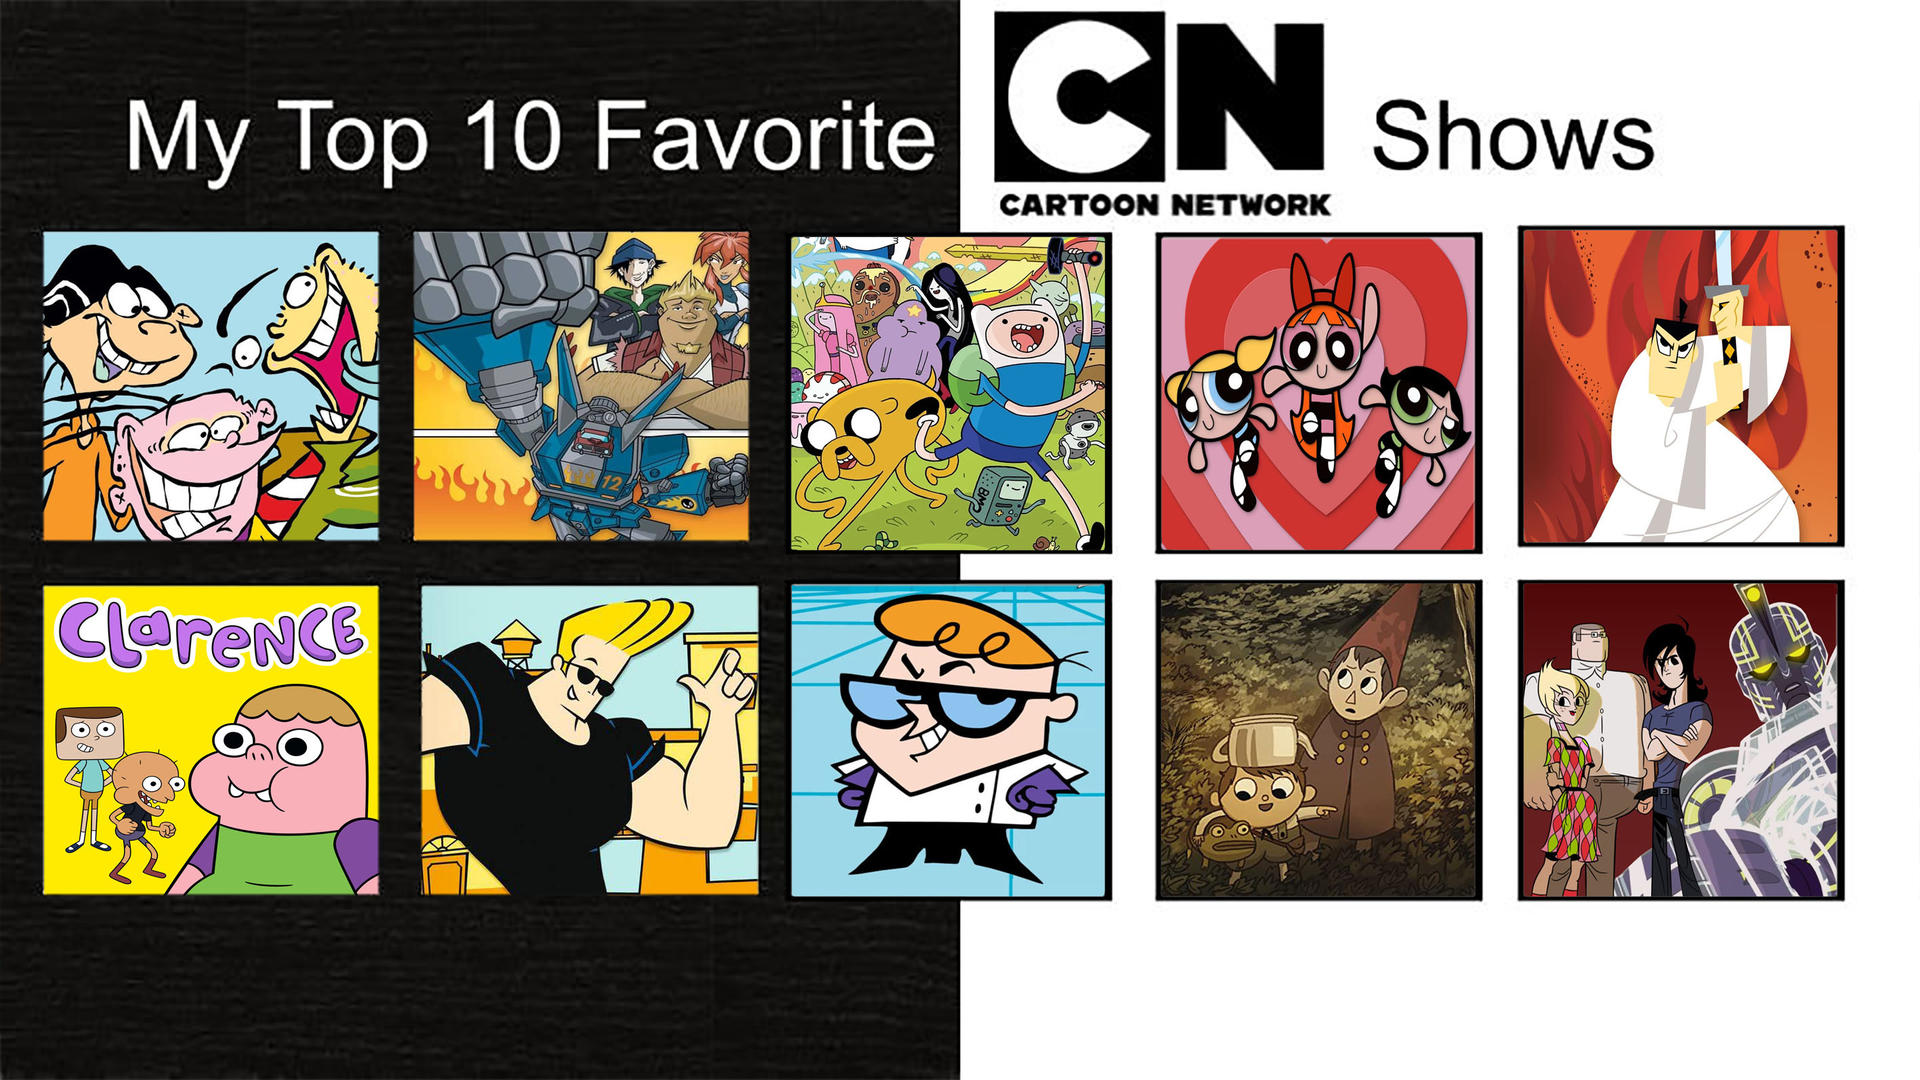 Top 10 Personal Favorite Cartoon Network Shows, cartoon network shows 